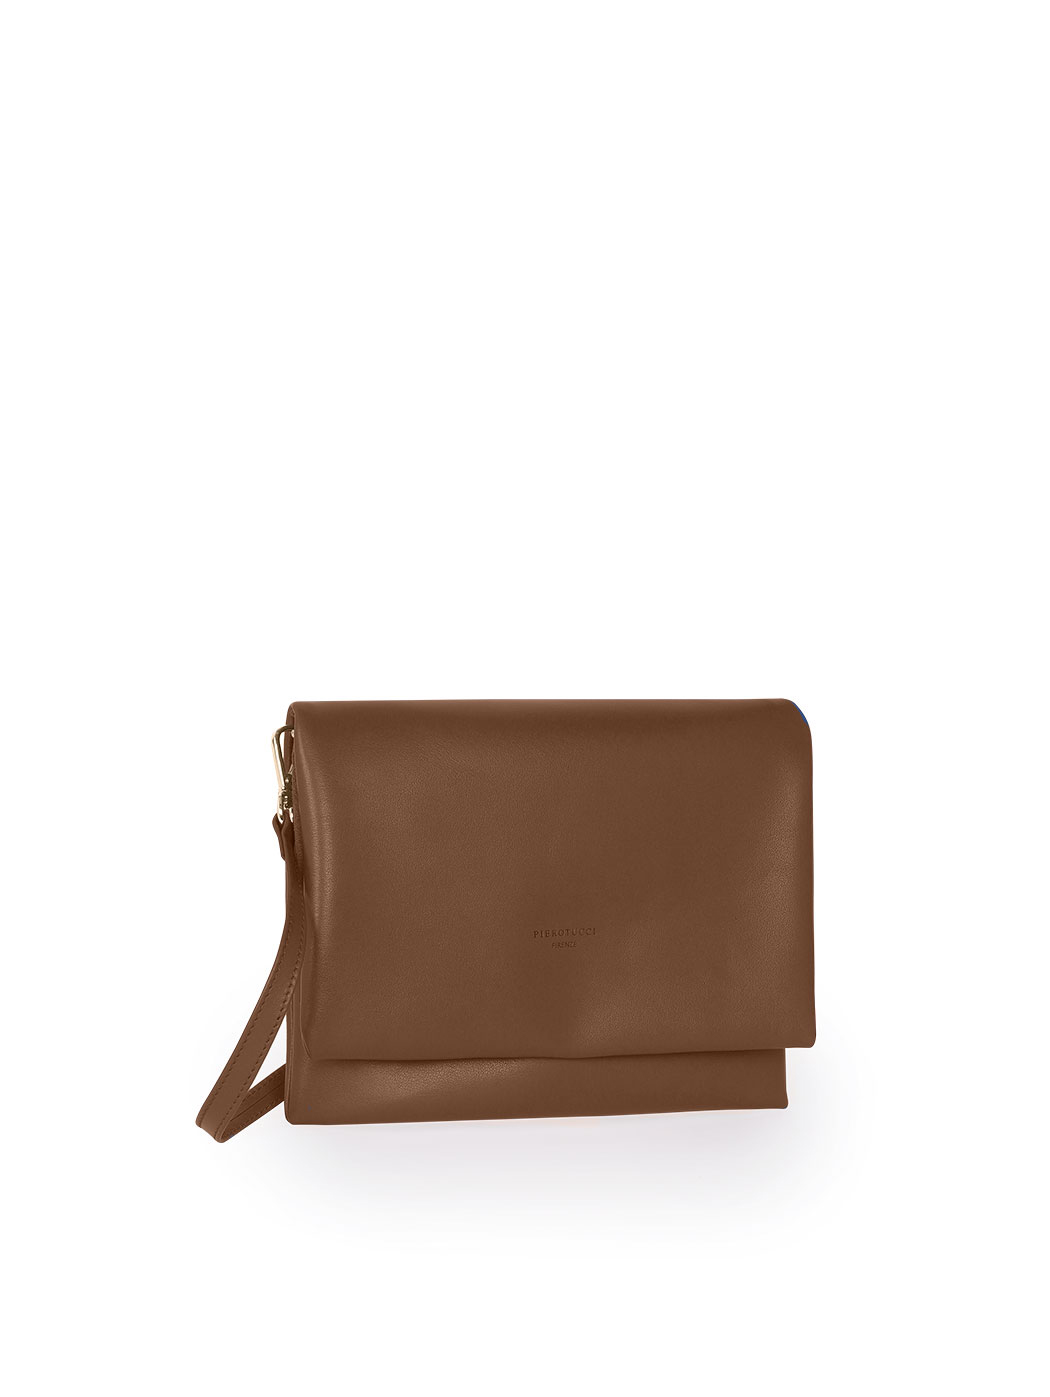 Leather Clutch Bags and Purses, with handle, crossbody | Marsèll